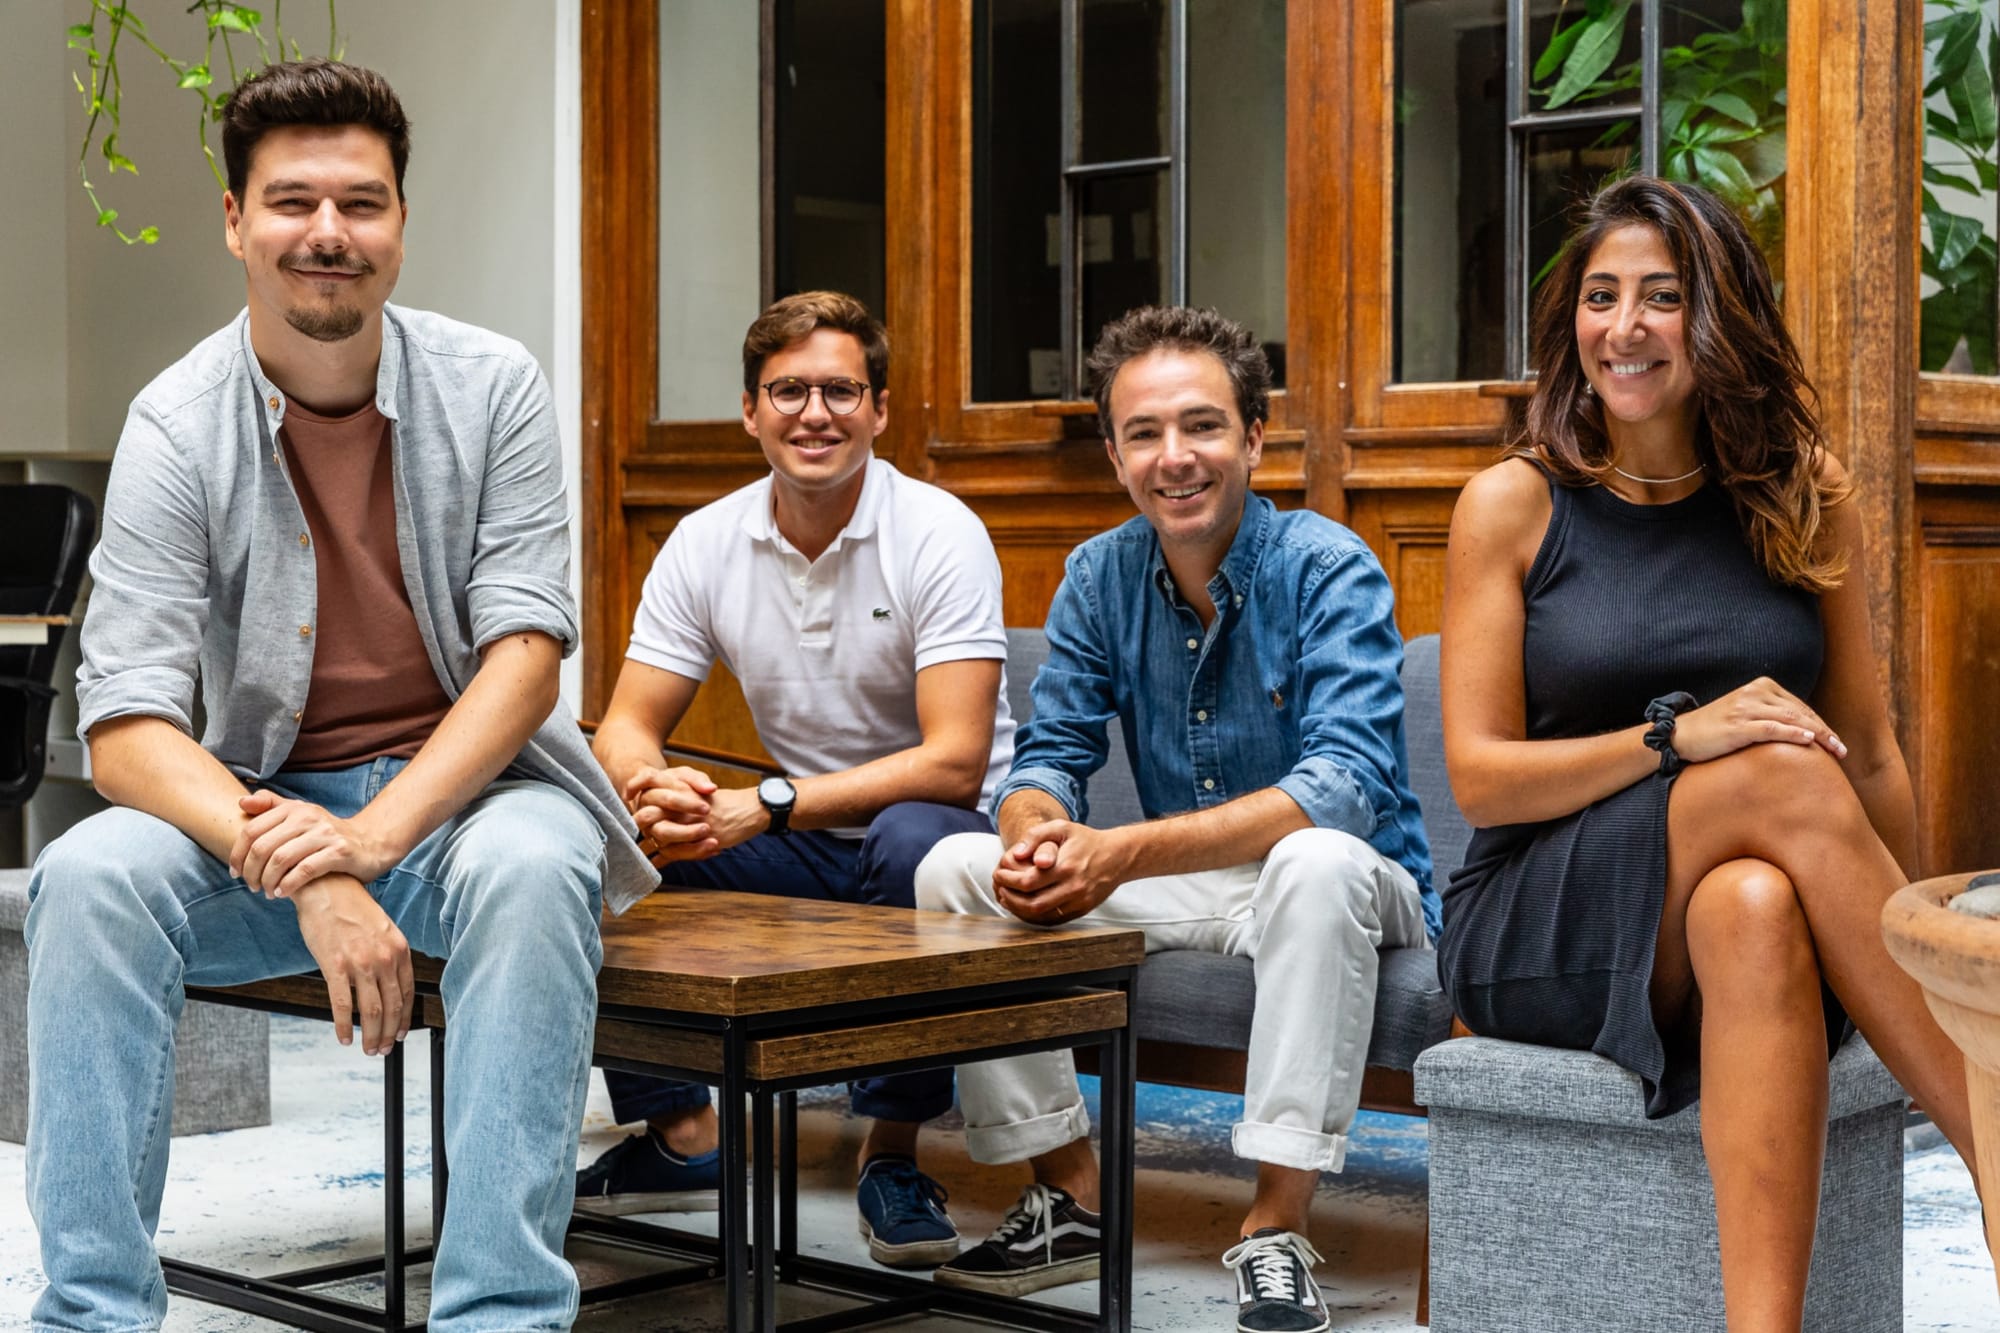 Prolong co-founders (left to right): Thibaud Courtoison, Henri Bouxin, Tanguy Frécon, Sarah Setti. 